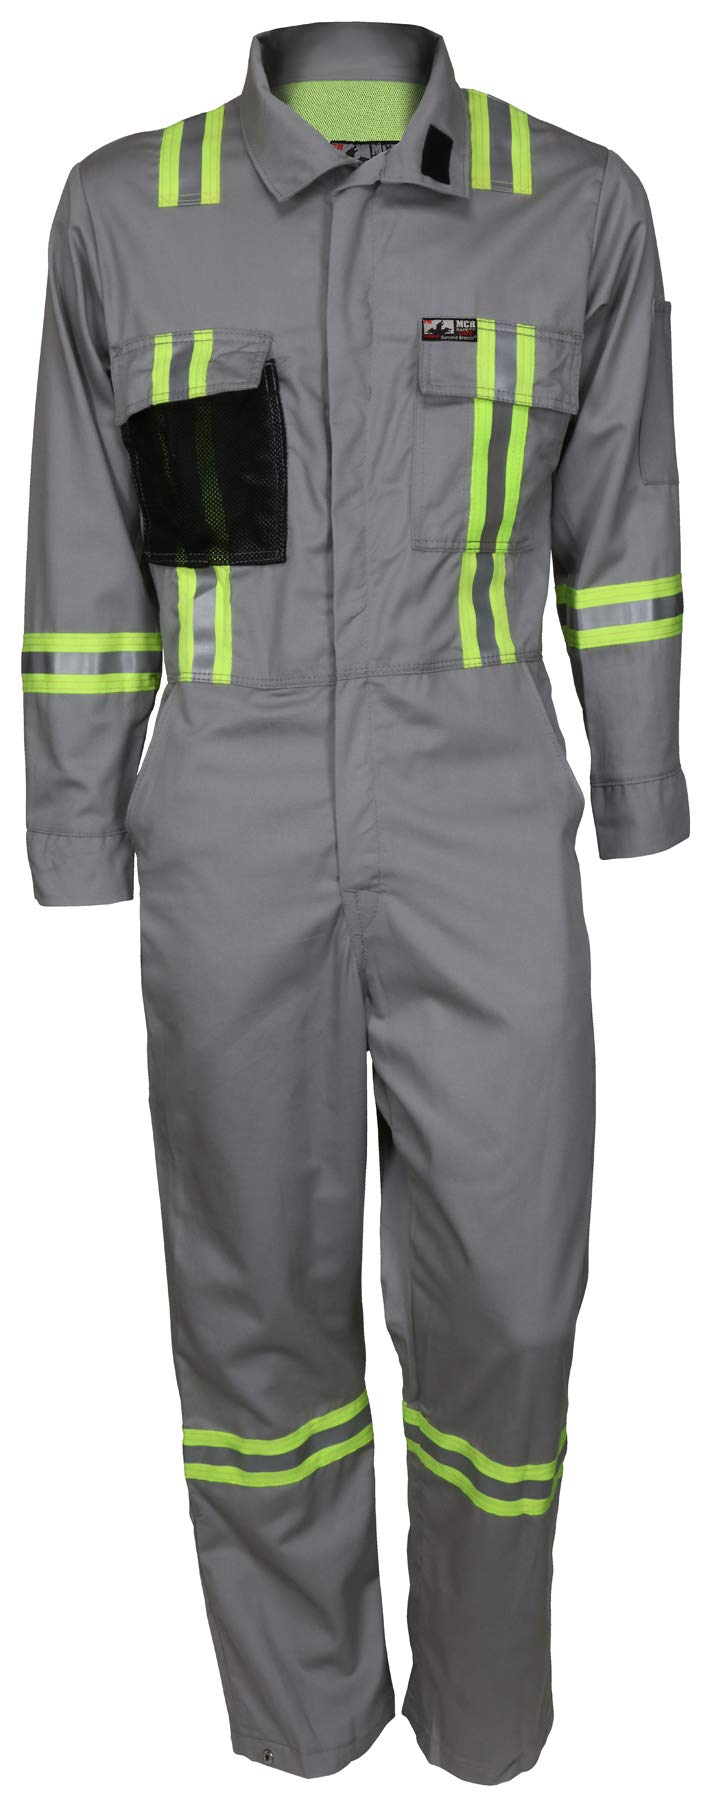 MCR Safety Summit Breeze Flame Resistant FR Long Sleeve Coveralls, 7 oz Cotton, Reflective, Vents, Gray, 42